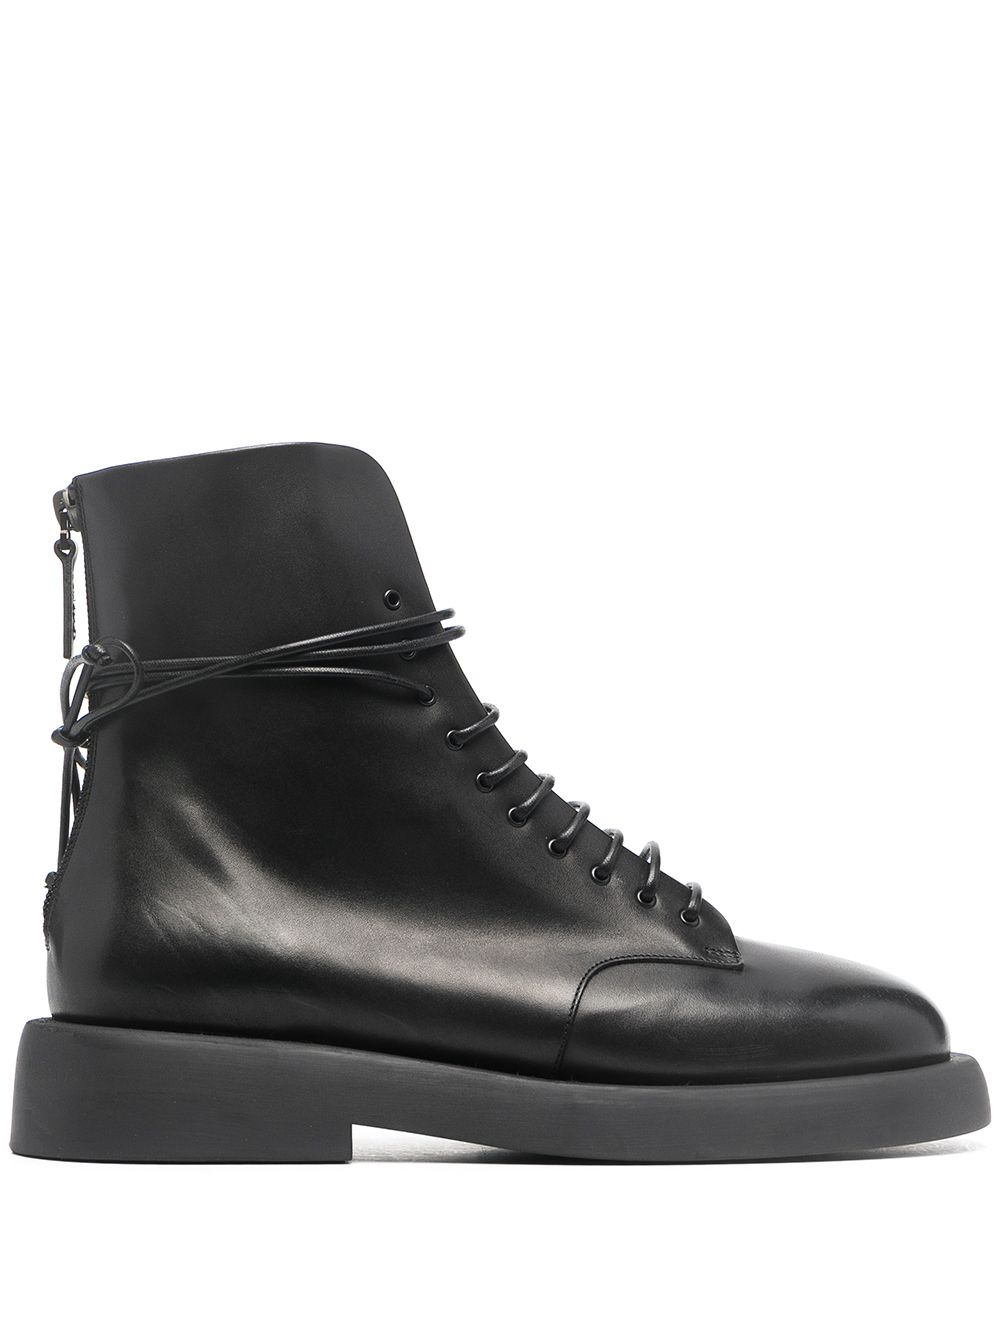 Marsèll chunky lace-up leather boots - Black von Marsèll